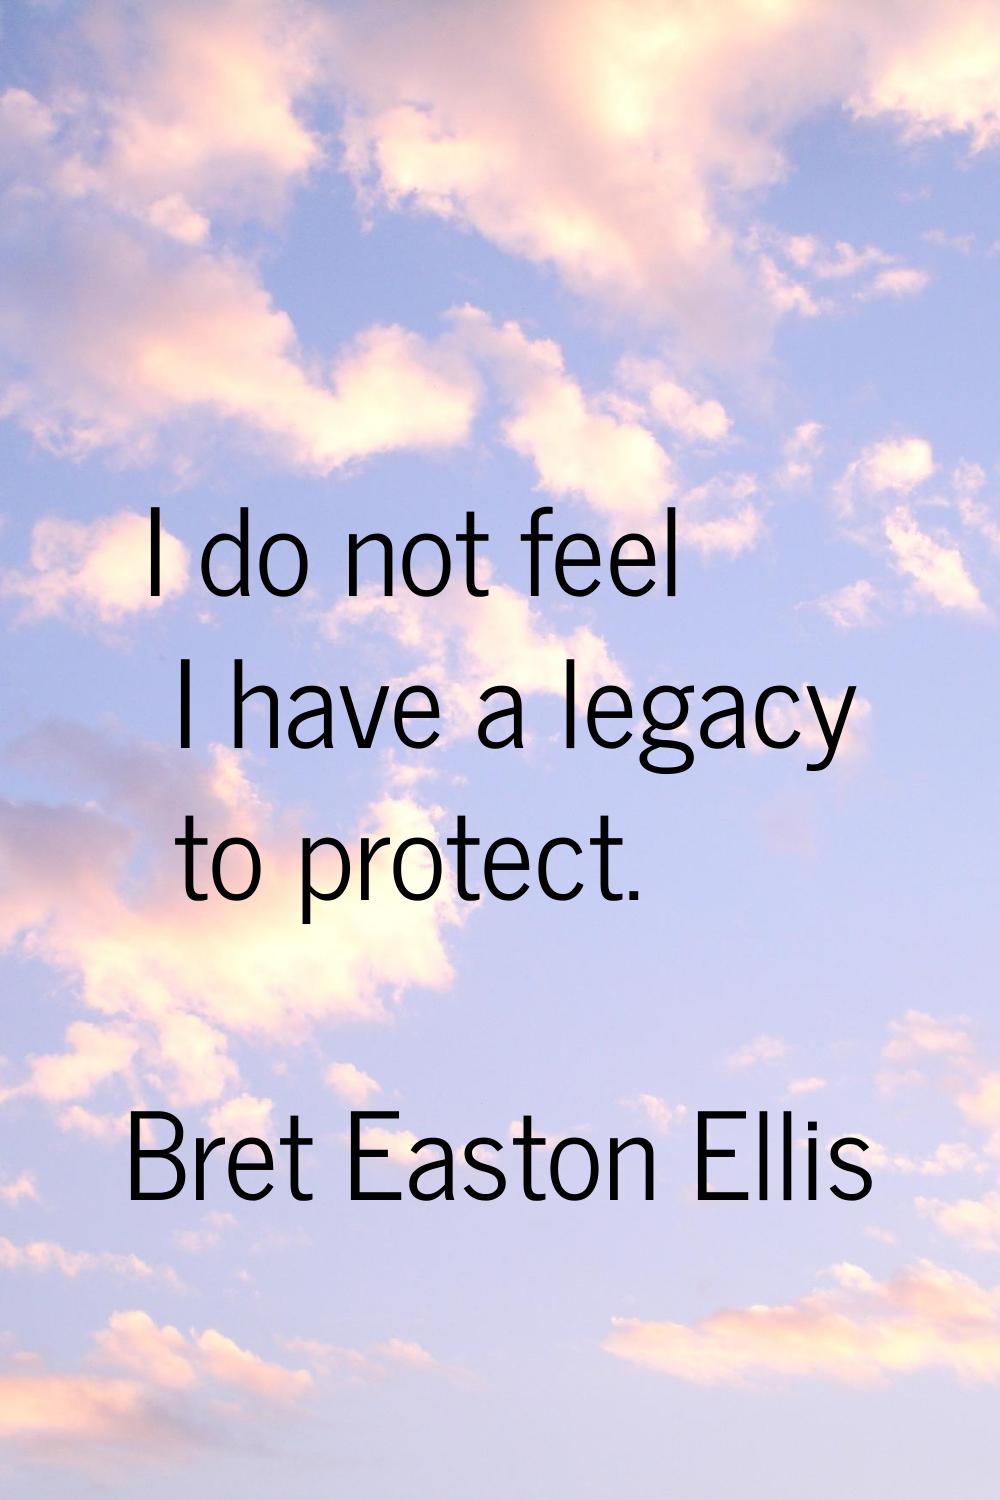 I do not feel I have a legacy to protect.